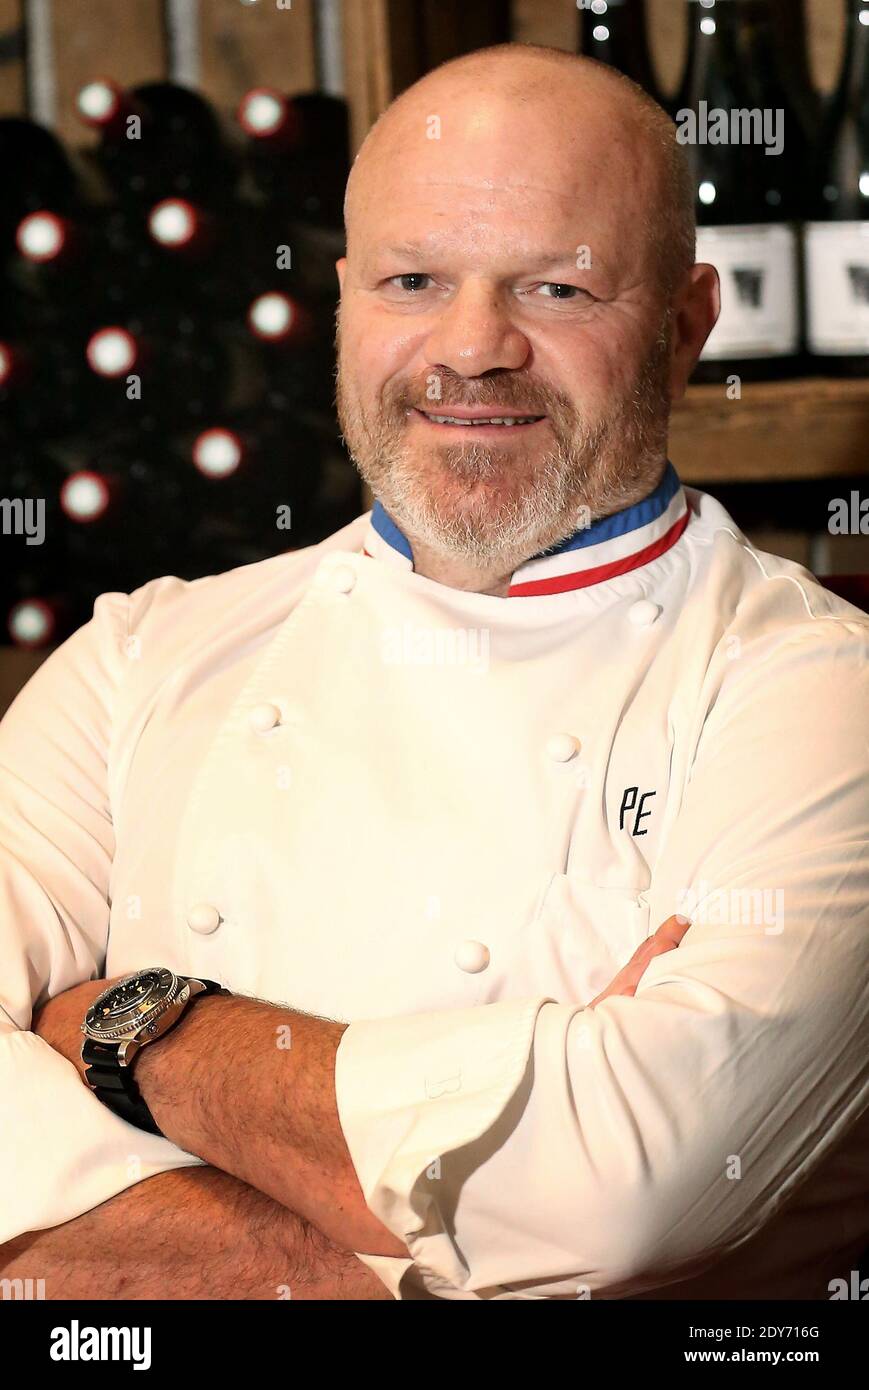 NO WEB/NO APPS - Exclusive. Famous Bordeaux chef and TV host Philippe  Etchebest during the preparation of a gala dinner as part of the 1st  'Bordeaux S.O Good' three-day culinary event, in